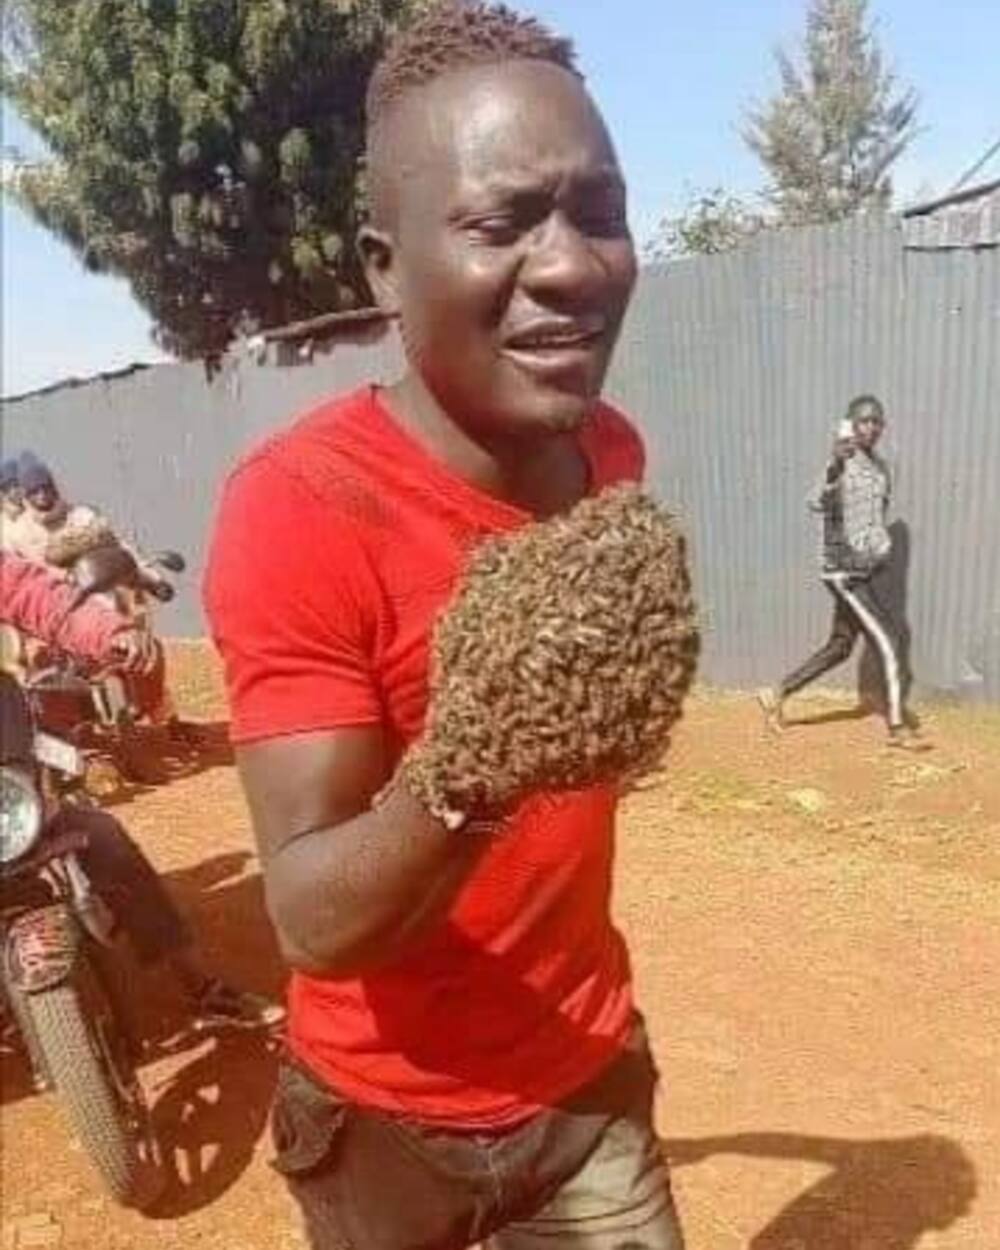 A Man Suffers the Wrath of Bees After Stealing in Machakos, Returns Everything